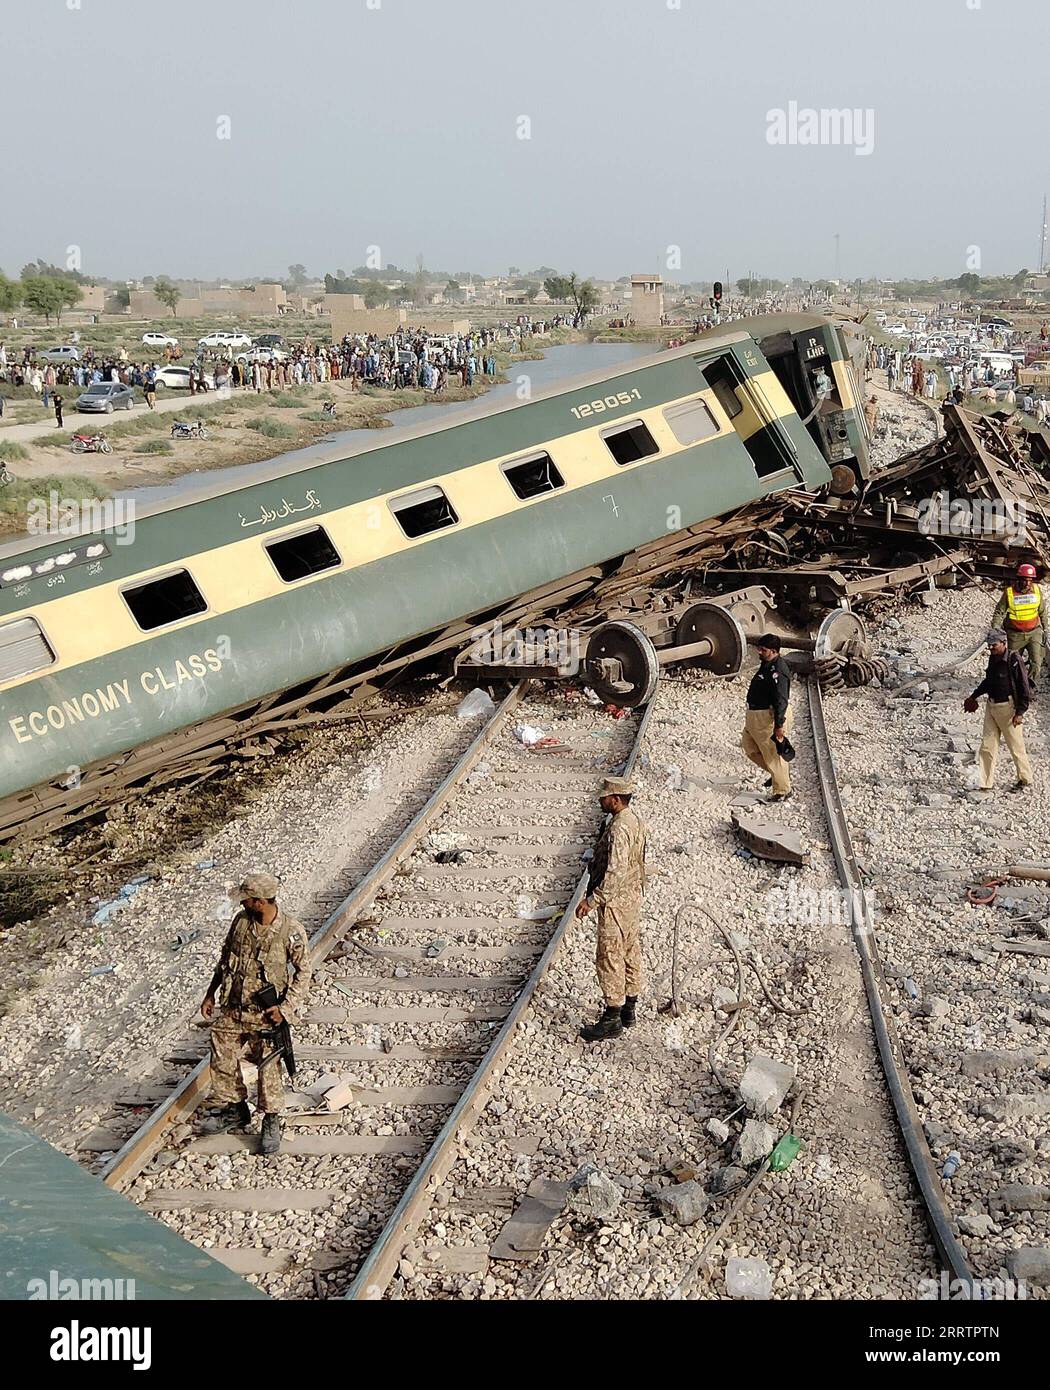 230806 -- SANGHAR, Aug. 6, 2023 -- Derailed coaches of a passenger train are seen in Sanghar district of Pakistan s southern Sindh province on Aug. 6, 2023. At least 22 people were killed and over 50 others injured on Sunday after a passenger train derailed in the Sanghar district of Pakistan s southern Sindh province, local police said. Str/Xinhua PAKISTAN-SANGHAR-TRAIN-ACCIDENT AhmadxKamal PUBLICATIONxNOTxINxCHN Stock Photo